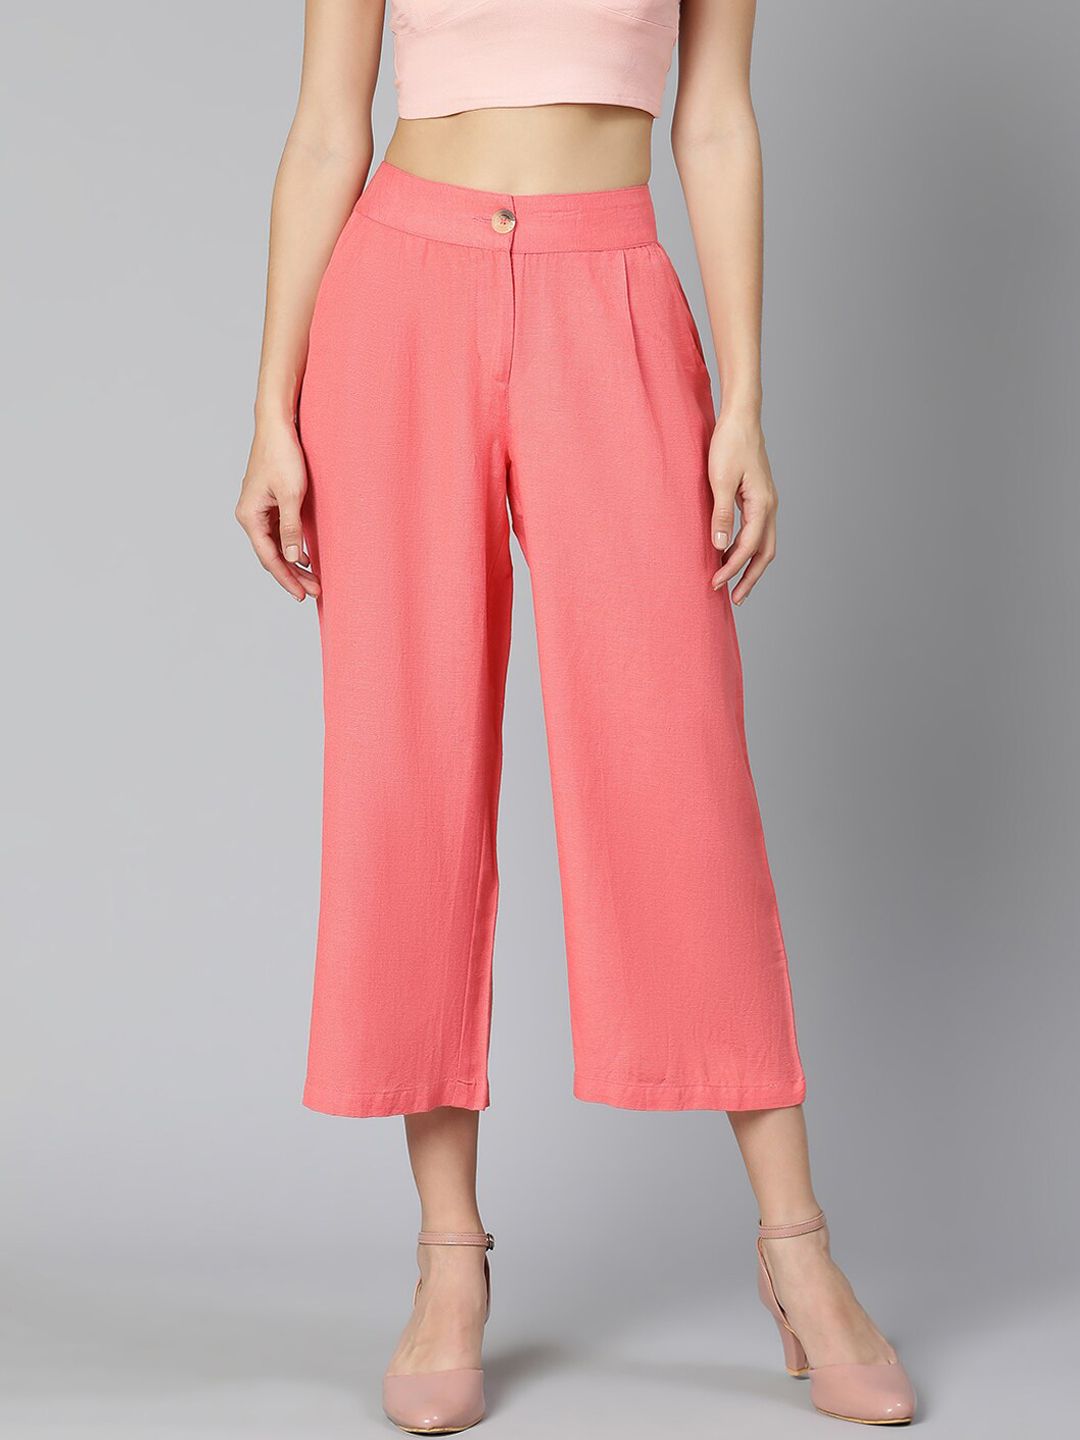 Oxolloxo Women Coral Flared Pleated Mid- Rise Culottes Trousers Price in India